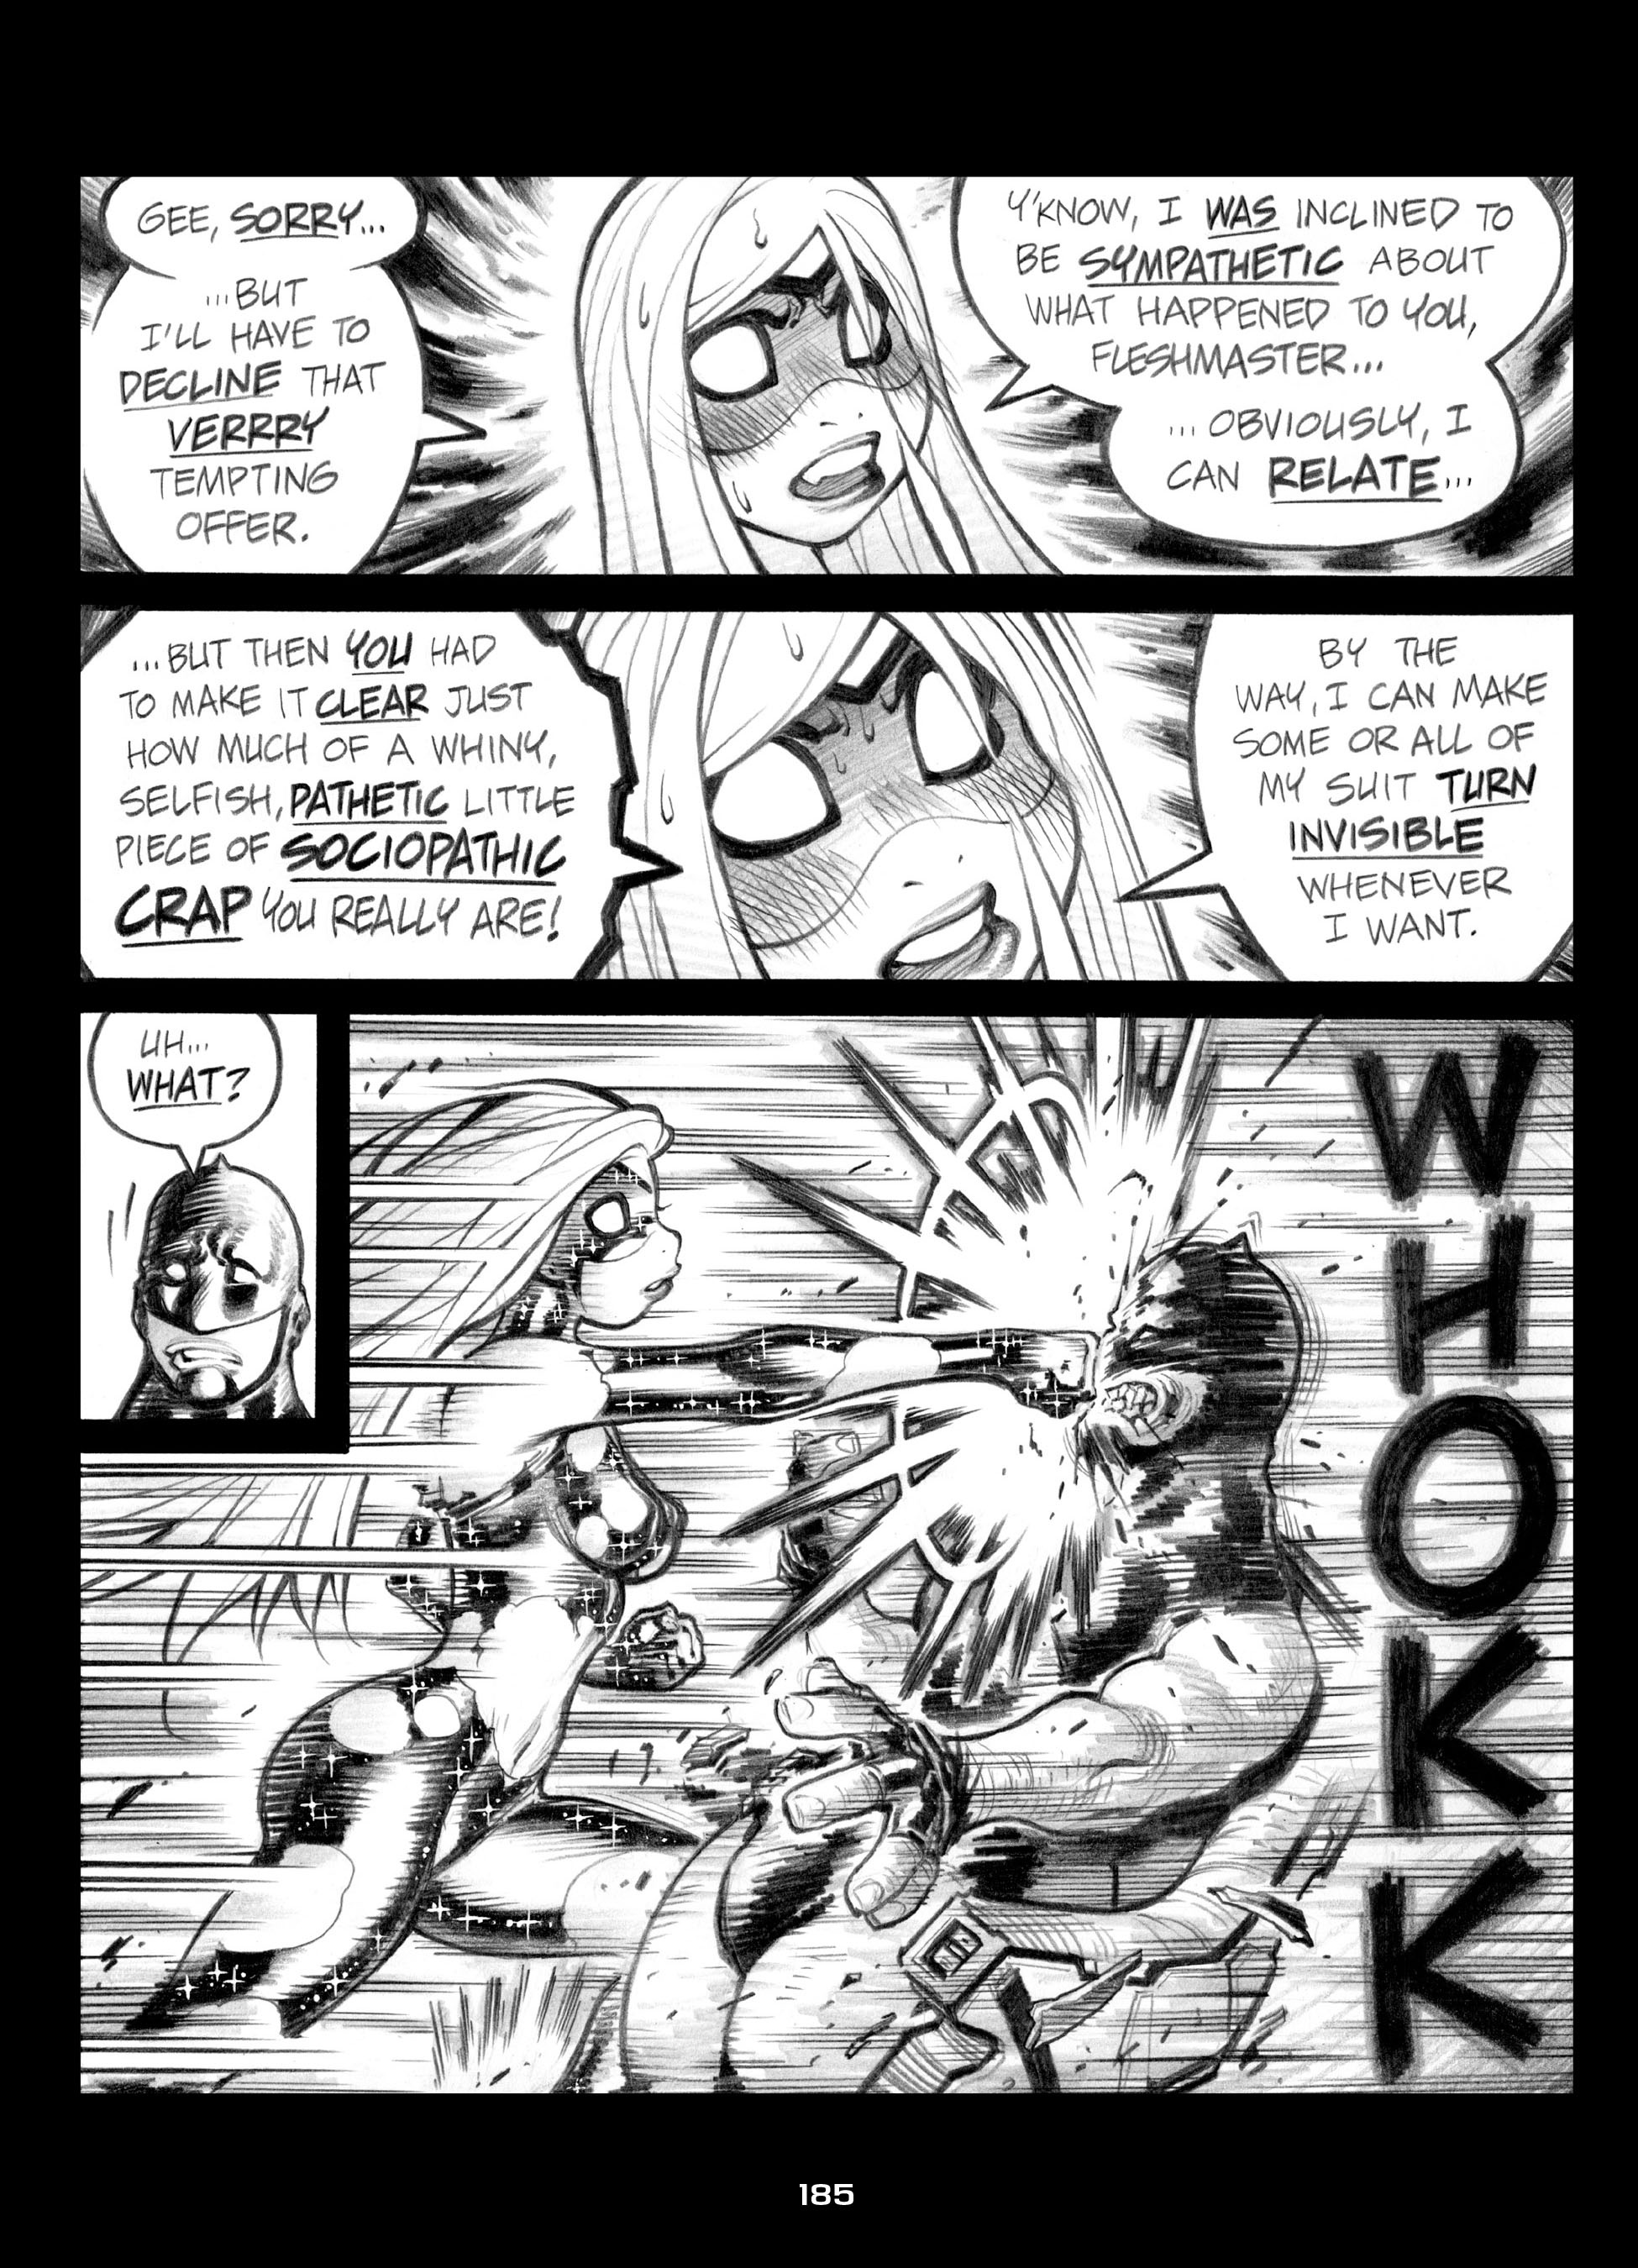 Read online Empowered comic -  Issue #4 - 185